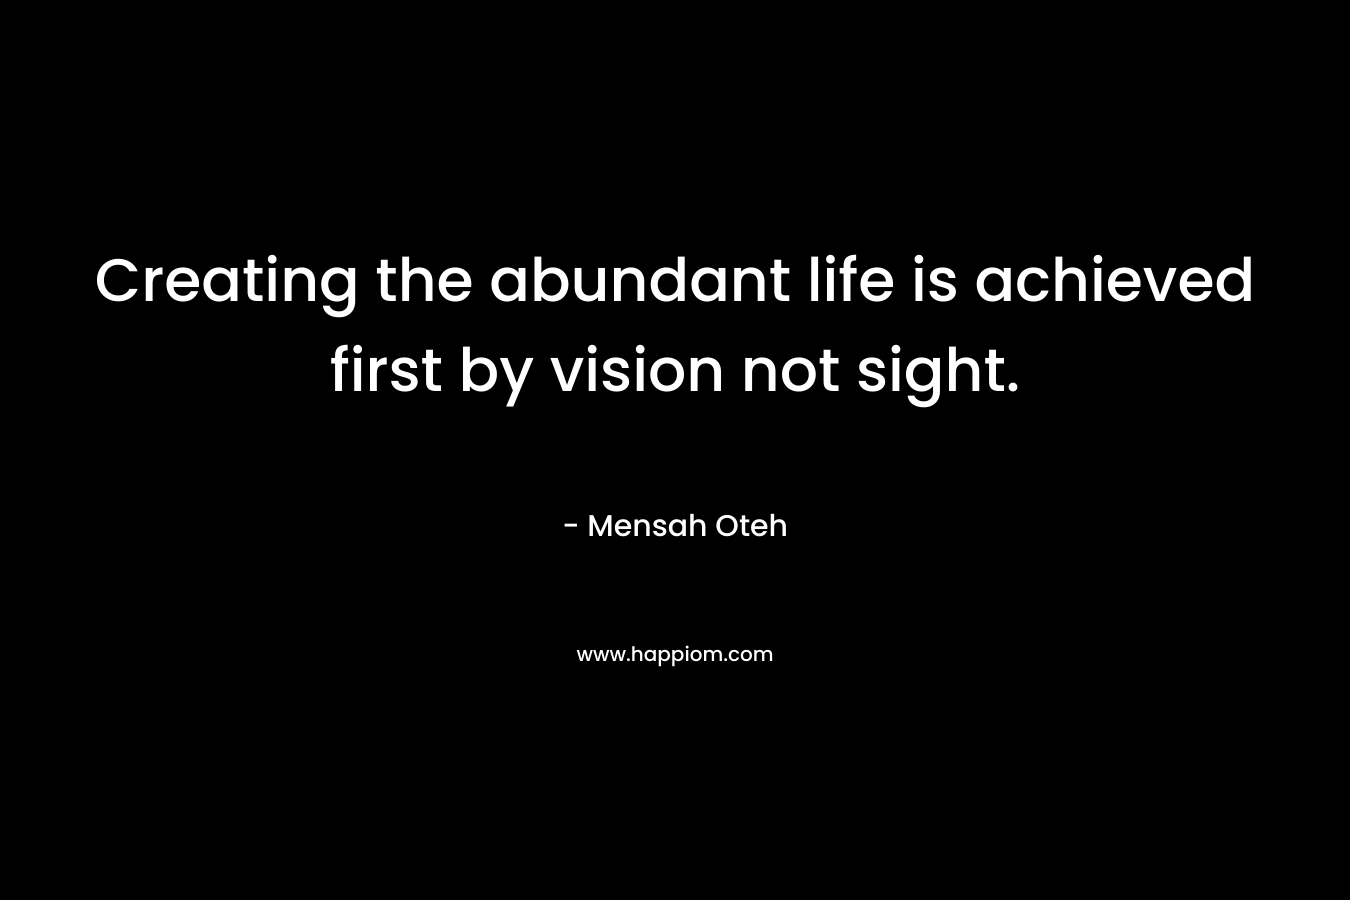 Creating the abundant life is achieved first by vision not sight.